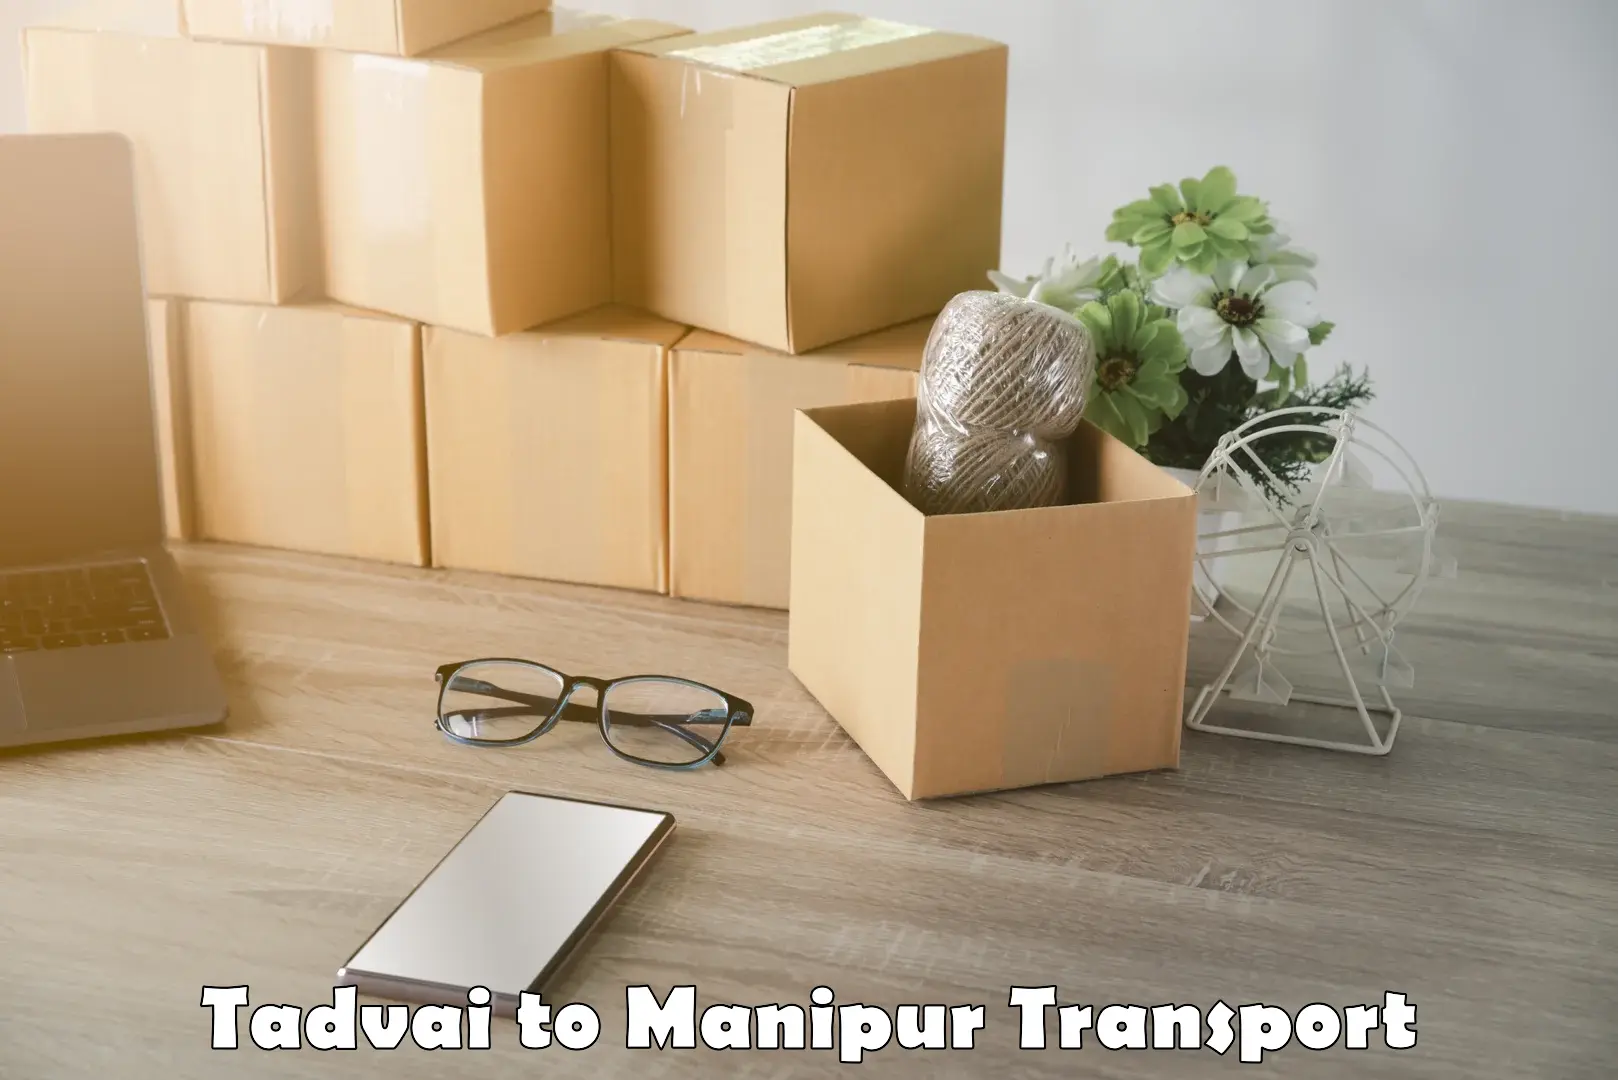 Transport in sharing Tadvai to Manipur